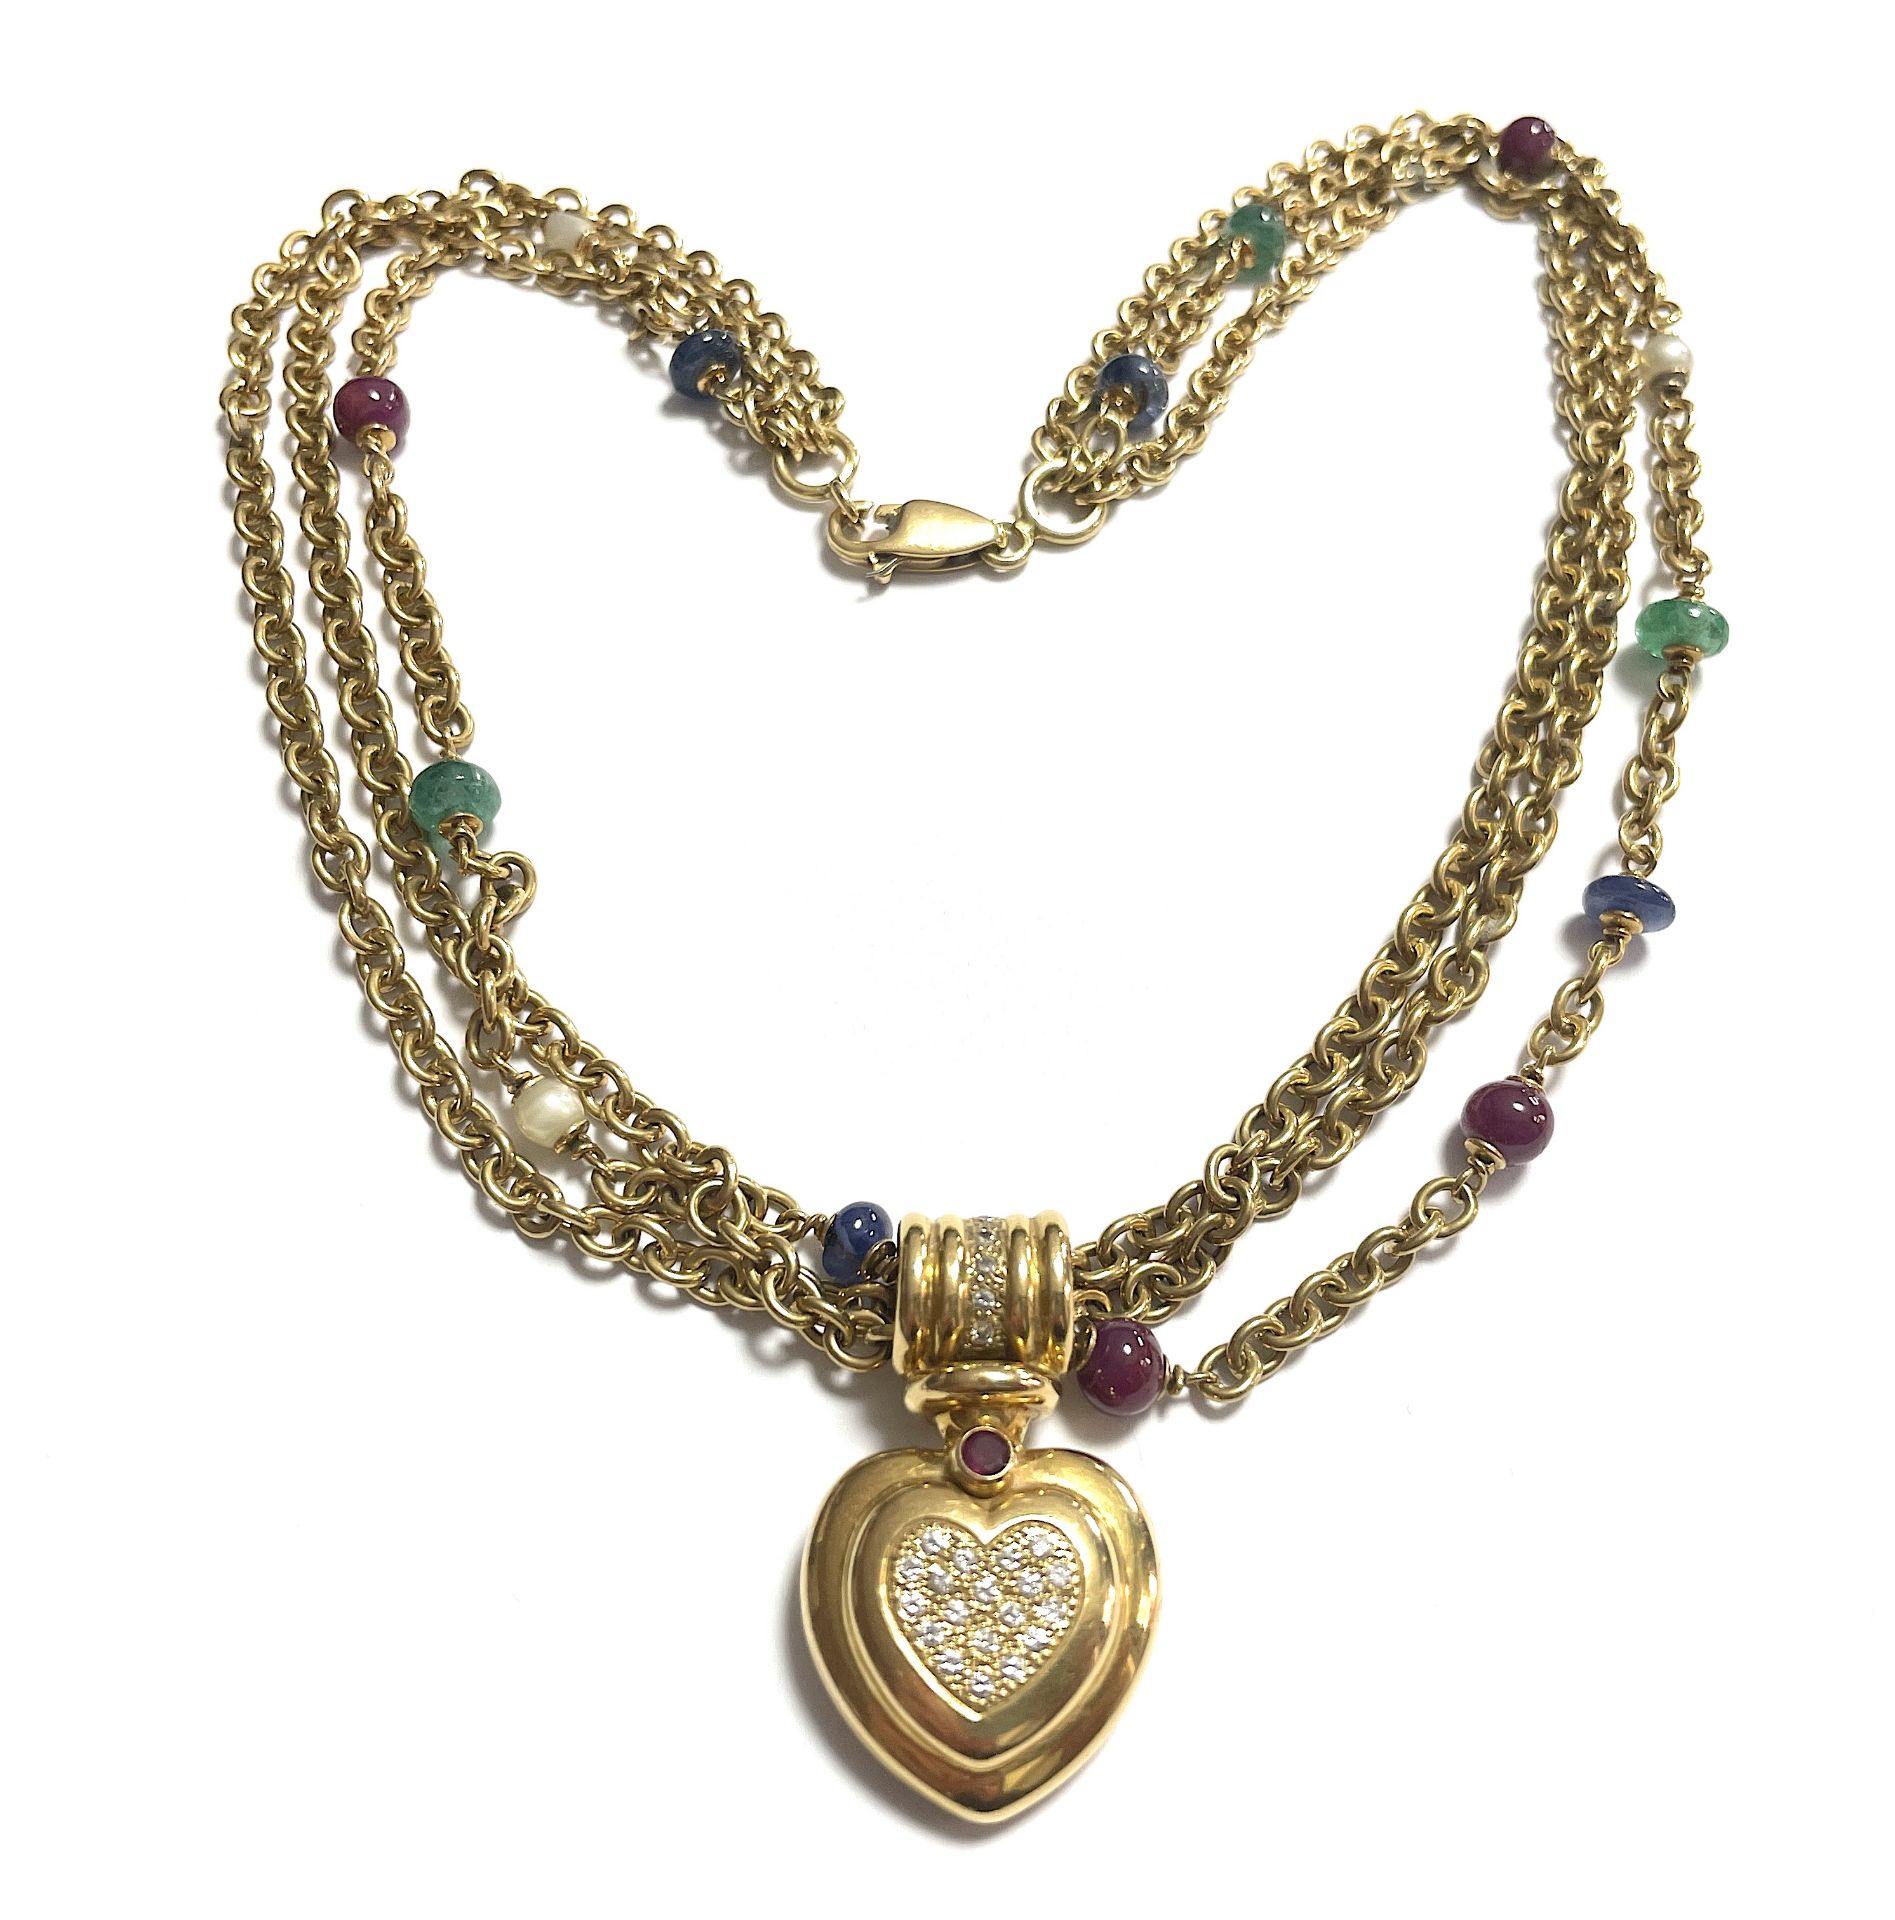 3 strands gemstone necklace with diamond heart - Image 2 of 6